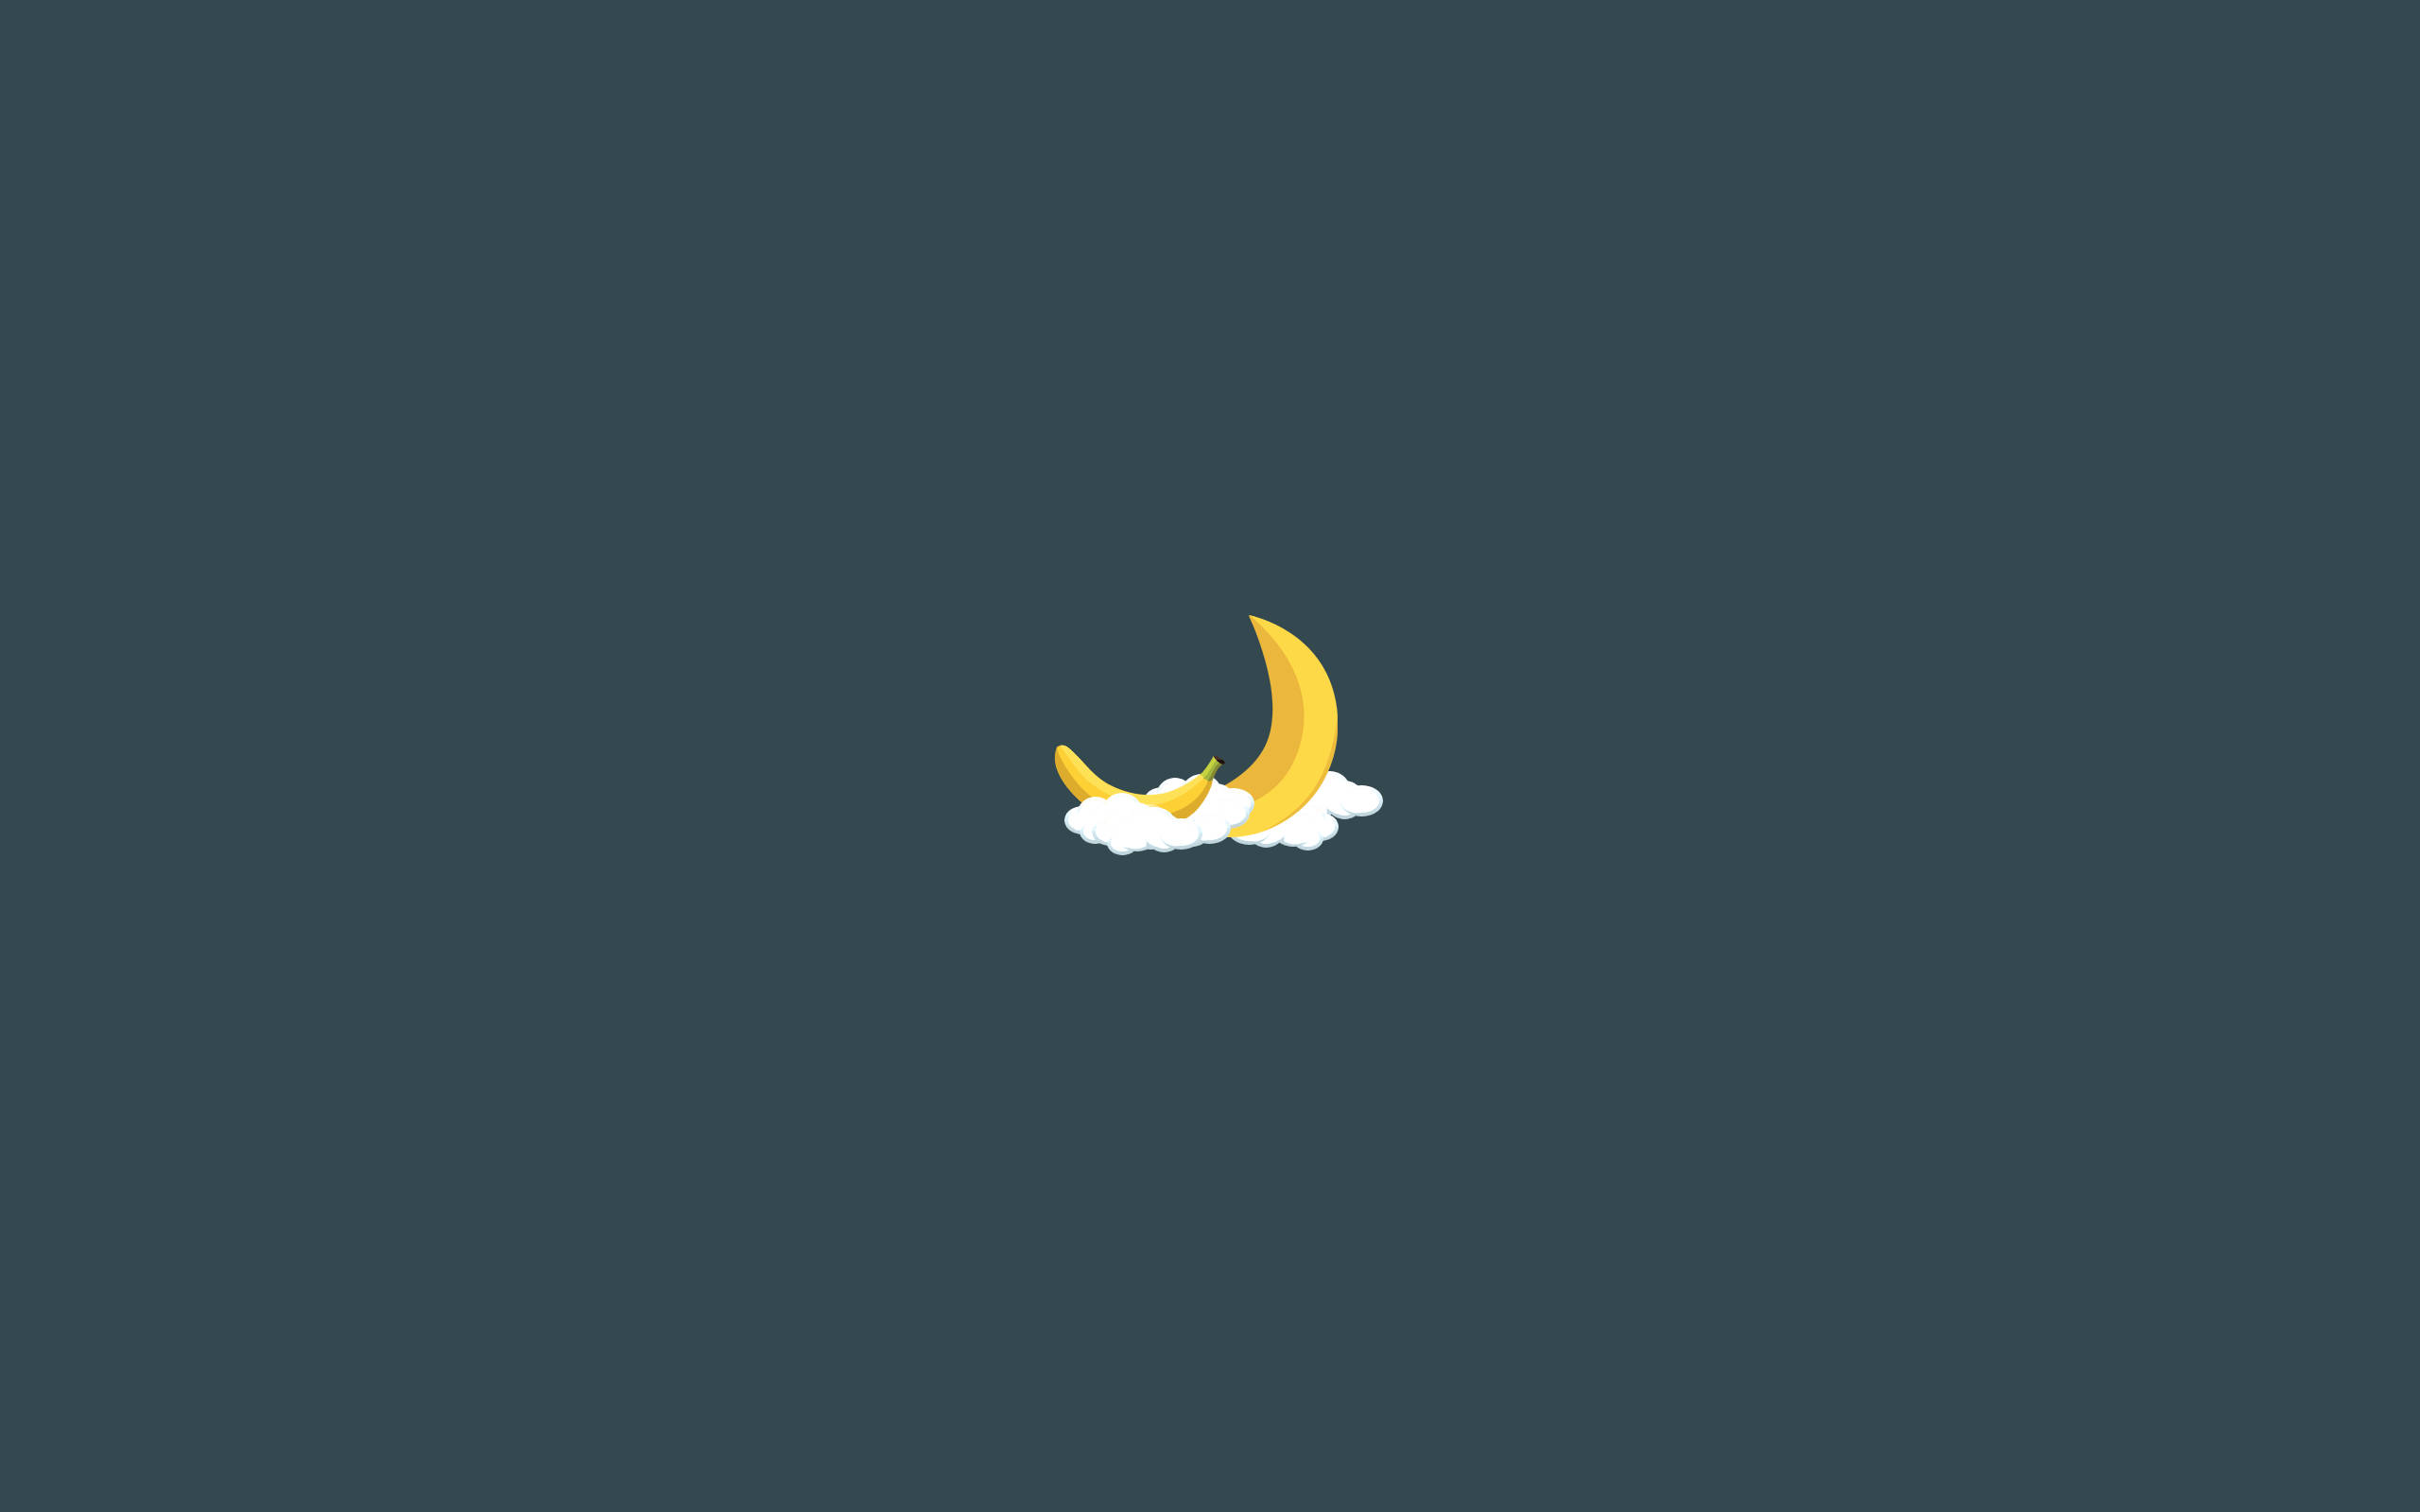 Moon And Clouds Minimalist Background